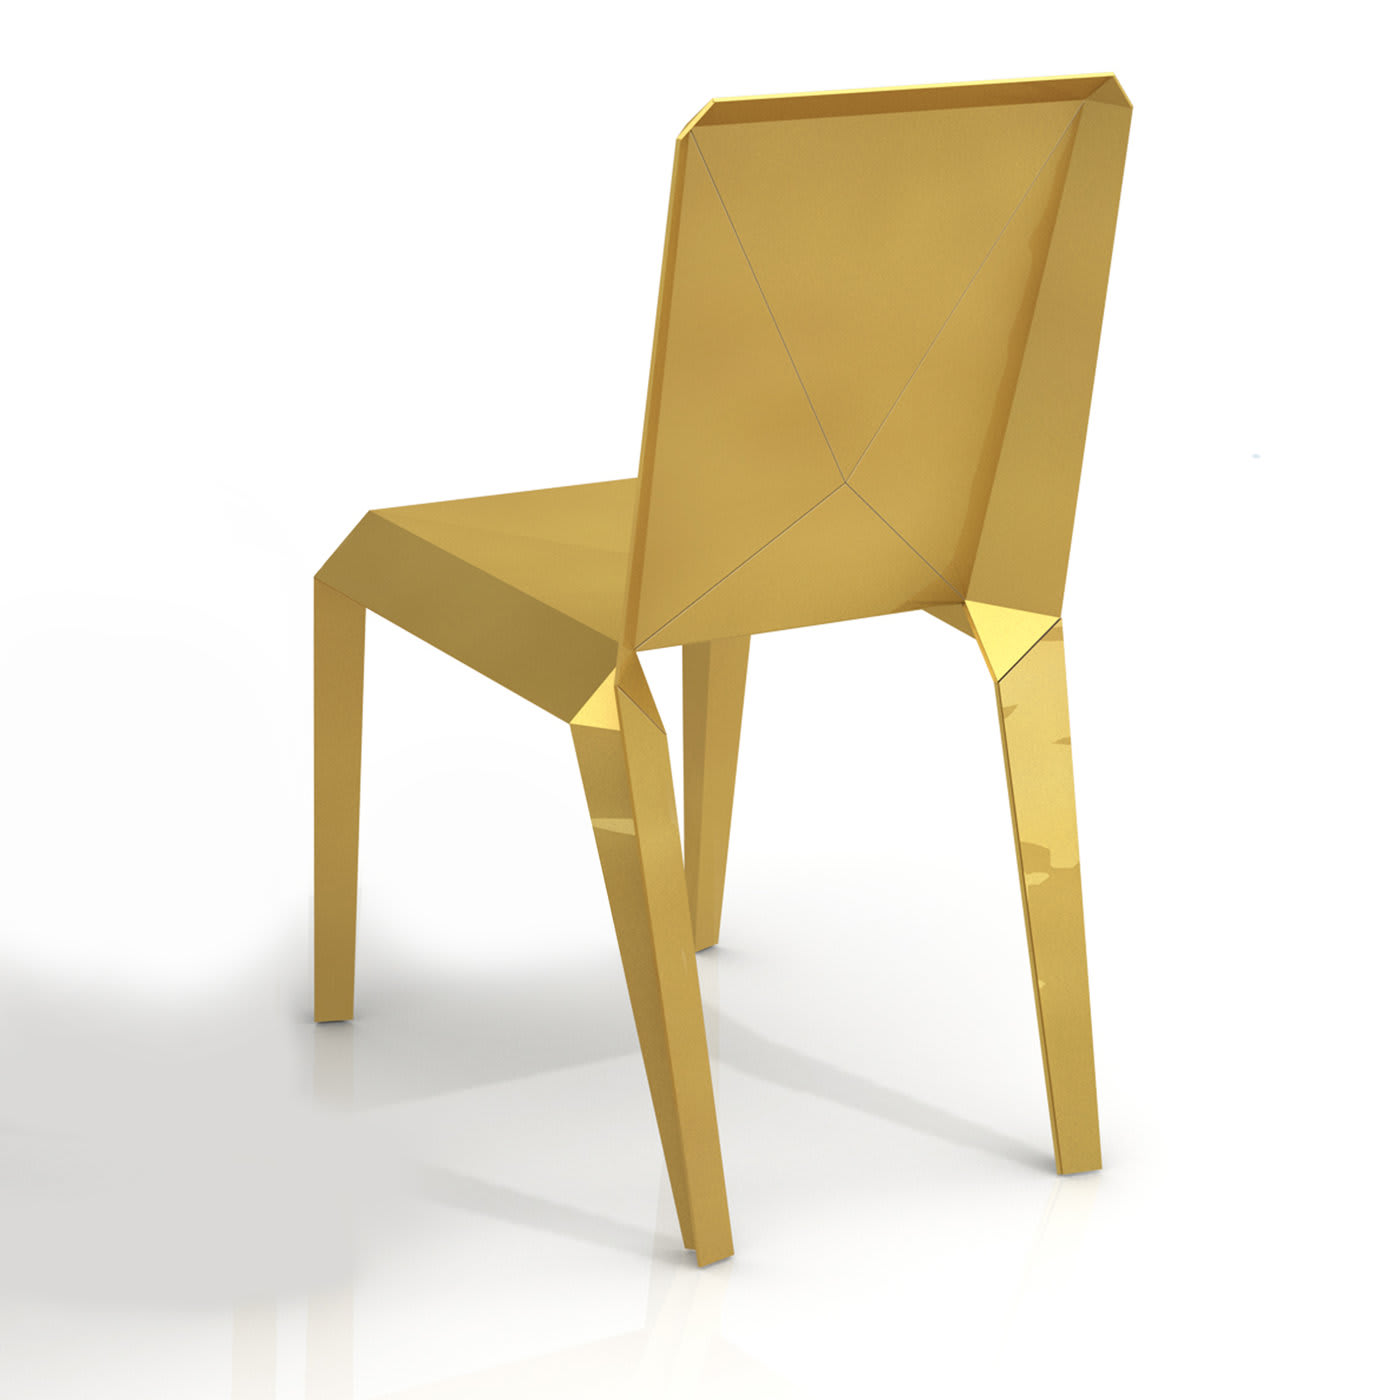 Lingotto Gold Chair by Garilab by Piter Perbellini - Altreforme